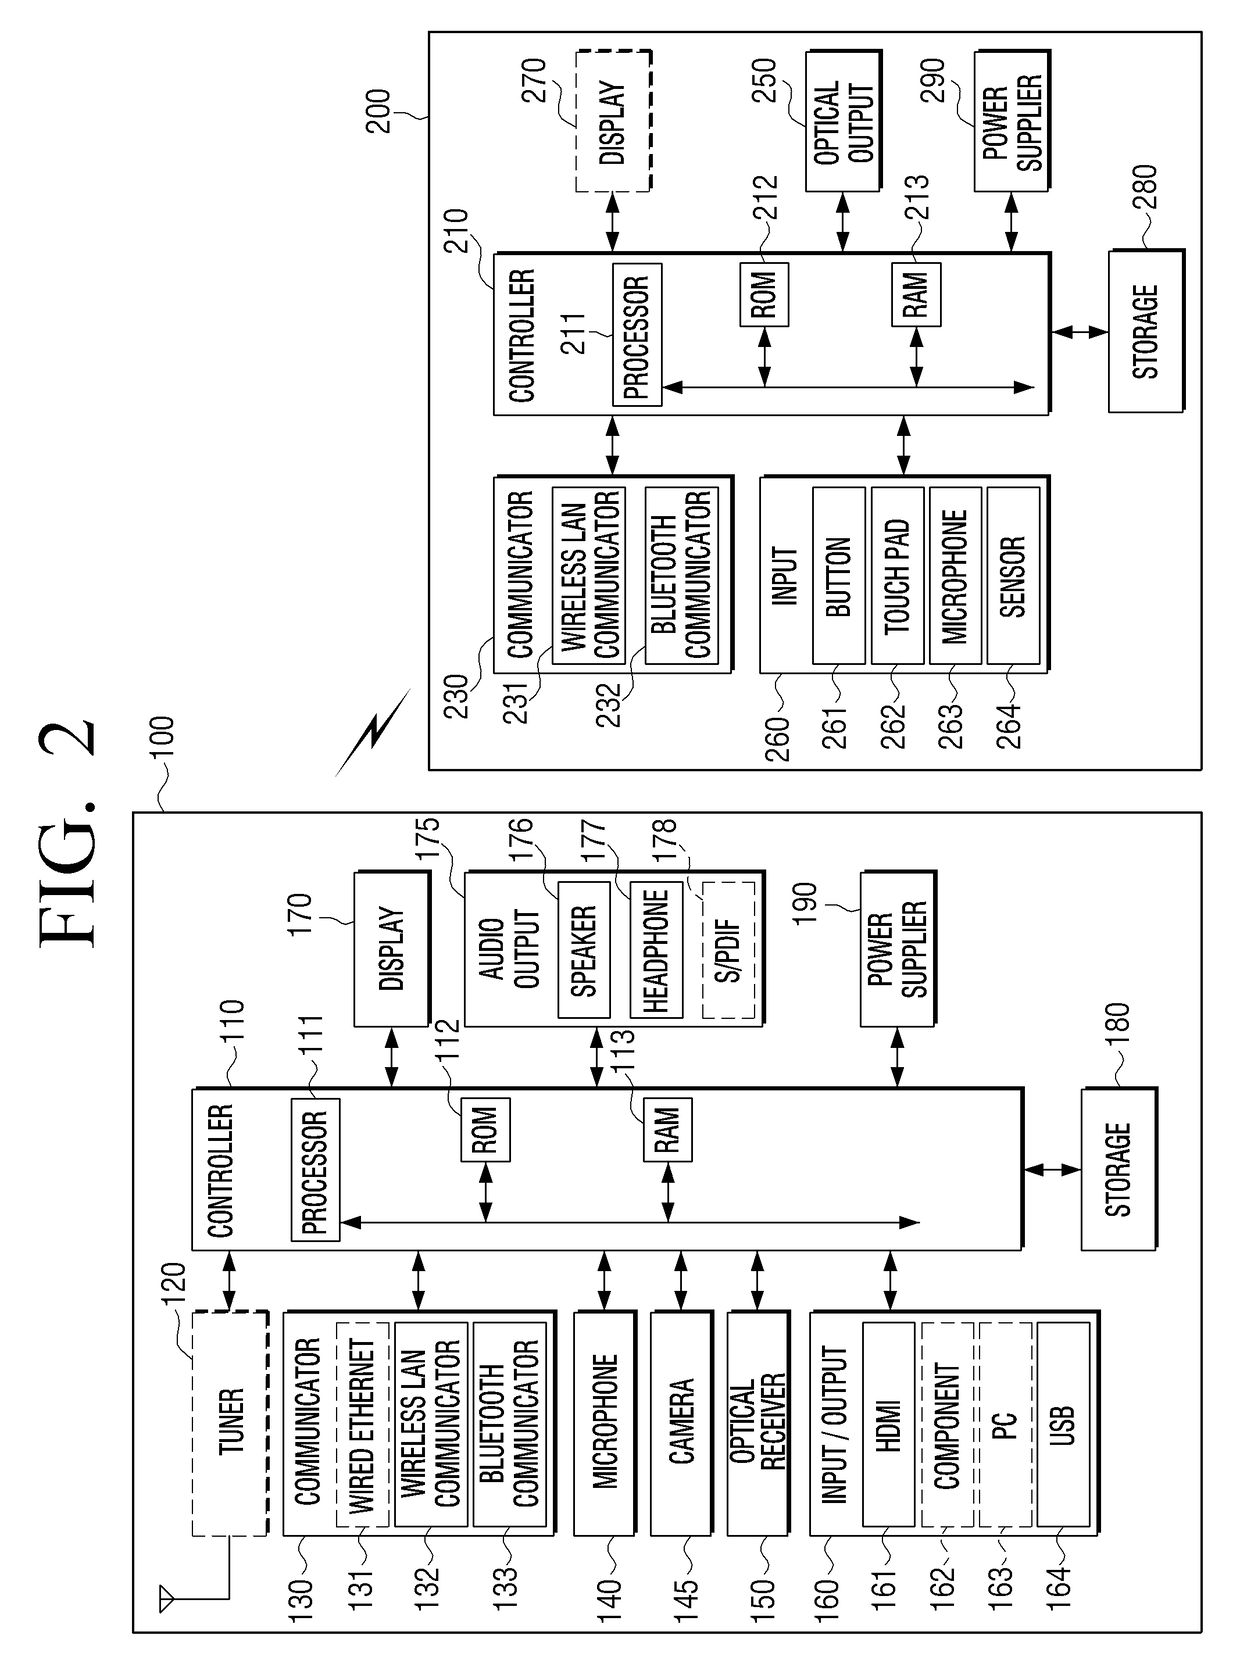 Display apparatus and method for controlling display apparatus